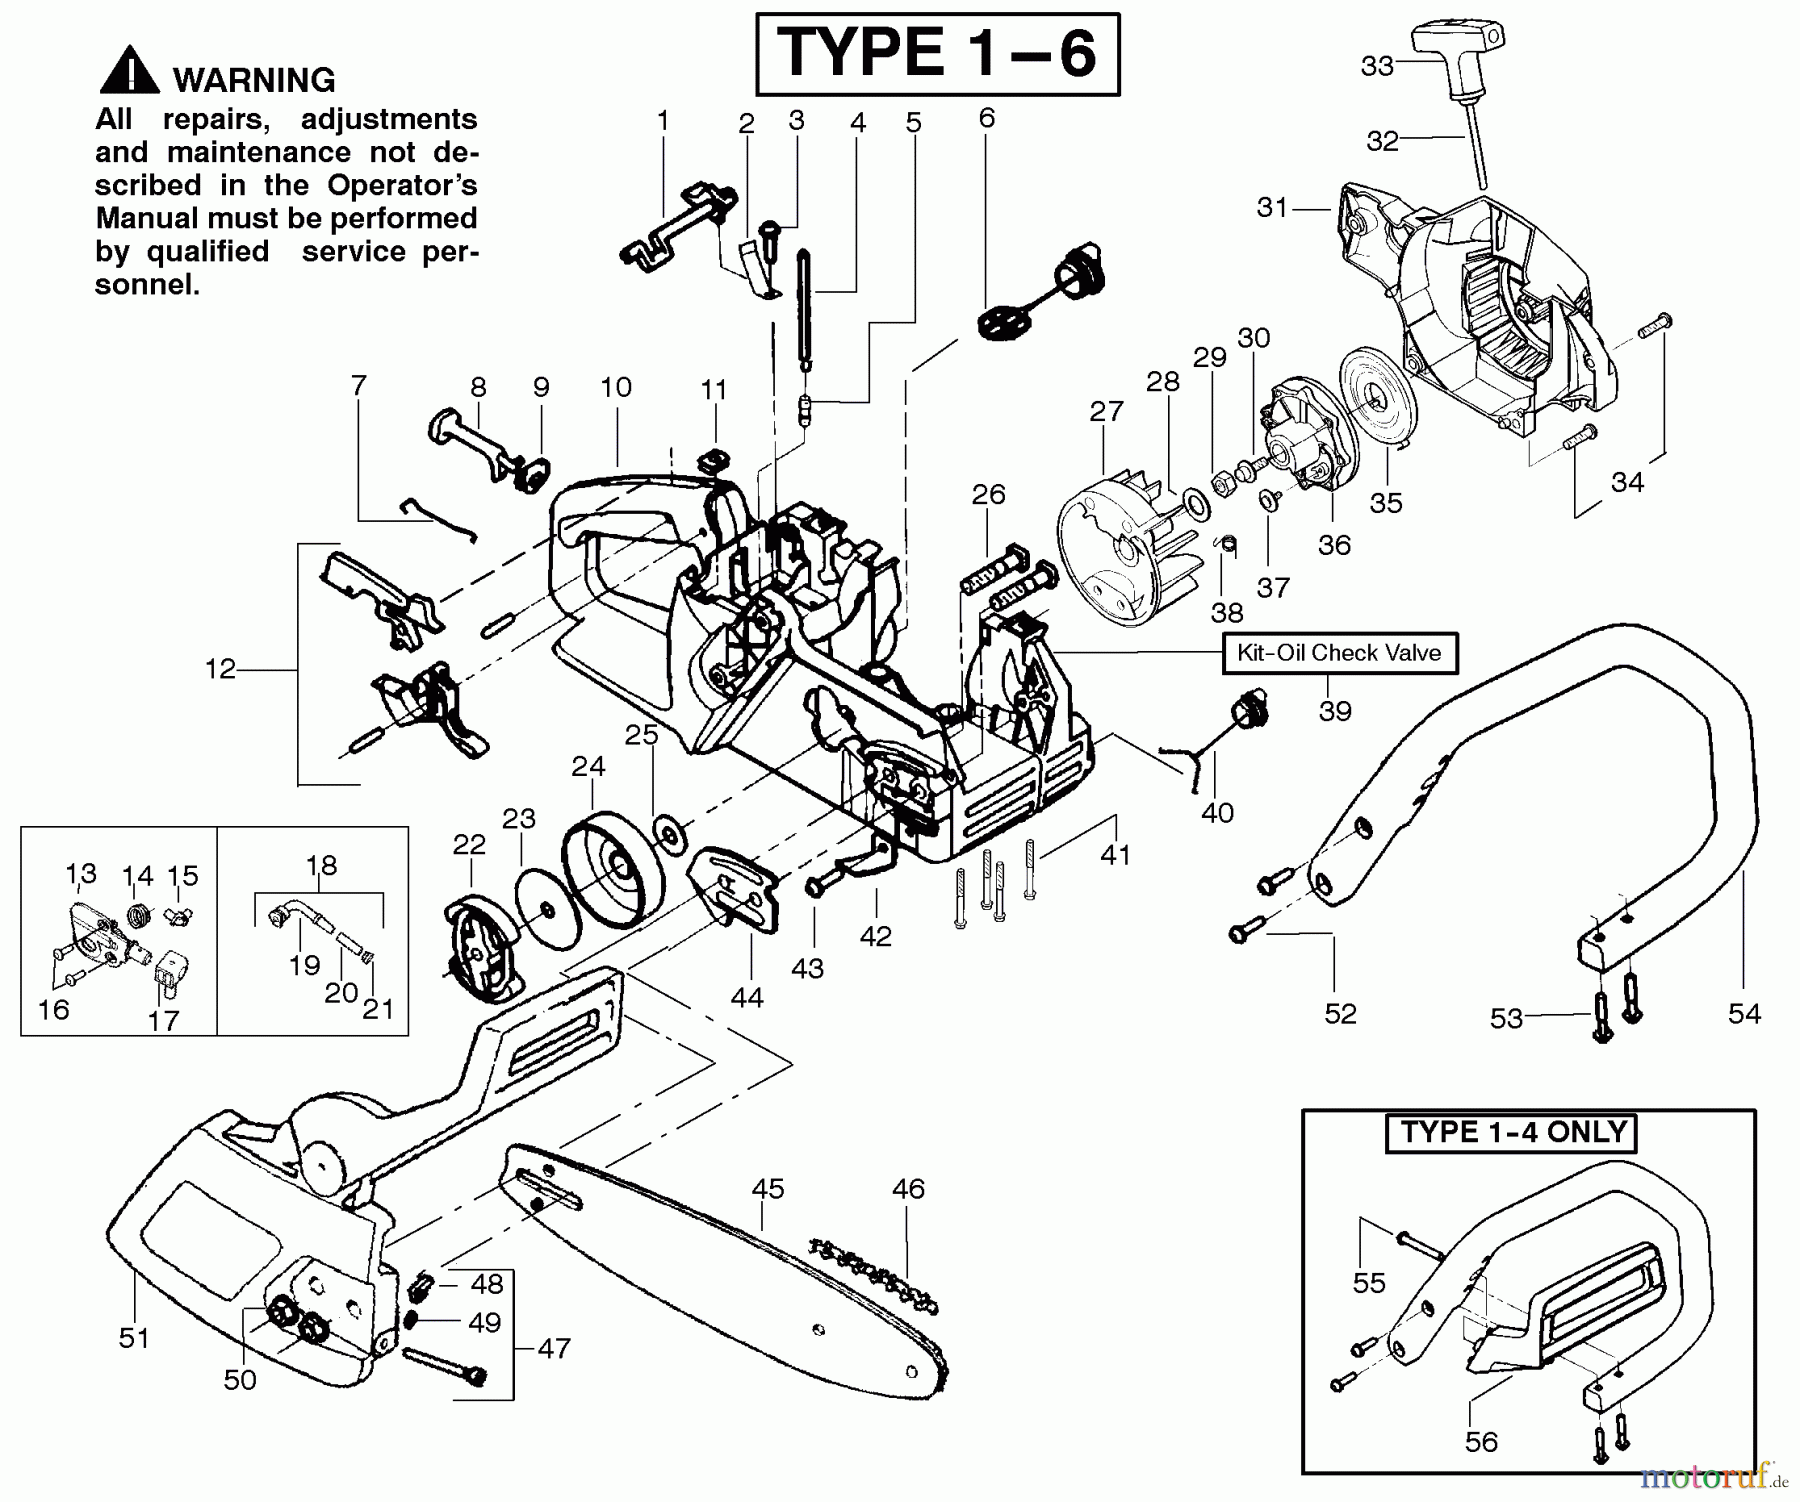  Poulan / Weed Eater Motorsägen 2050 (Type 4) - Poulan Pioneer Chainsaw Handle, Chassis & Bar Assembly Type 1-6